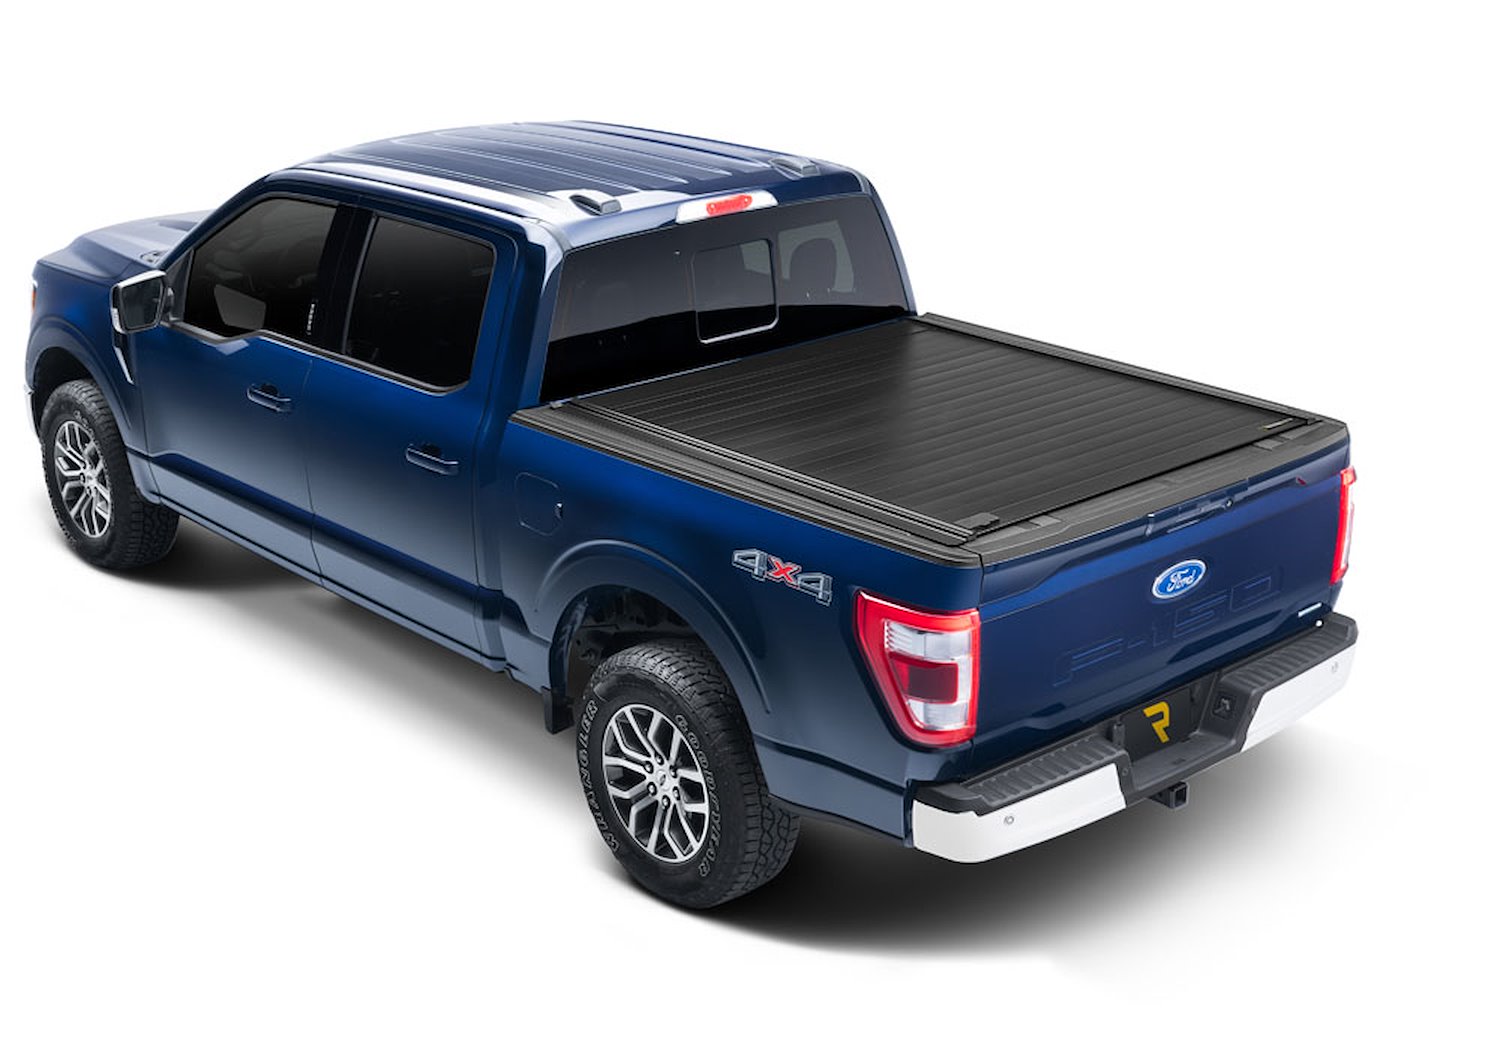 80379 RetraxPRO MX Retractable Tonneau Cover Fits Select Ford F-150 6' 7" Bed without Stake Pockets